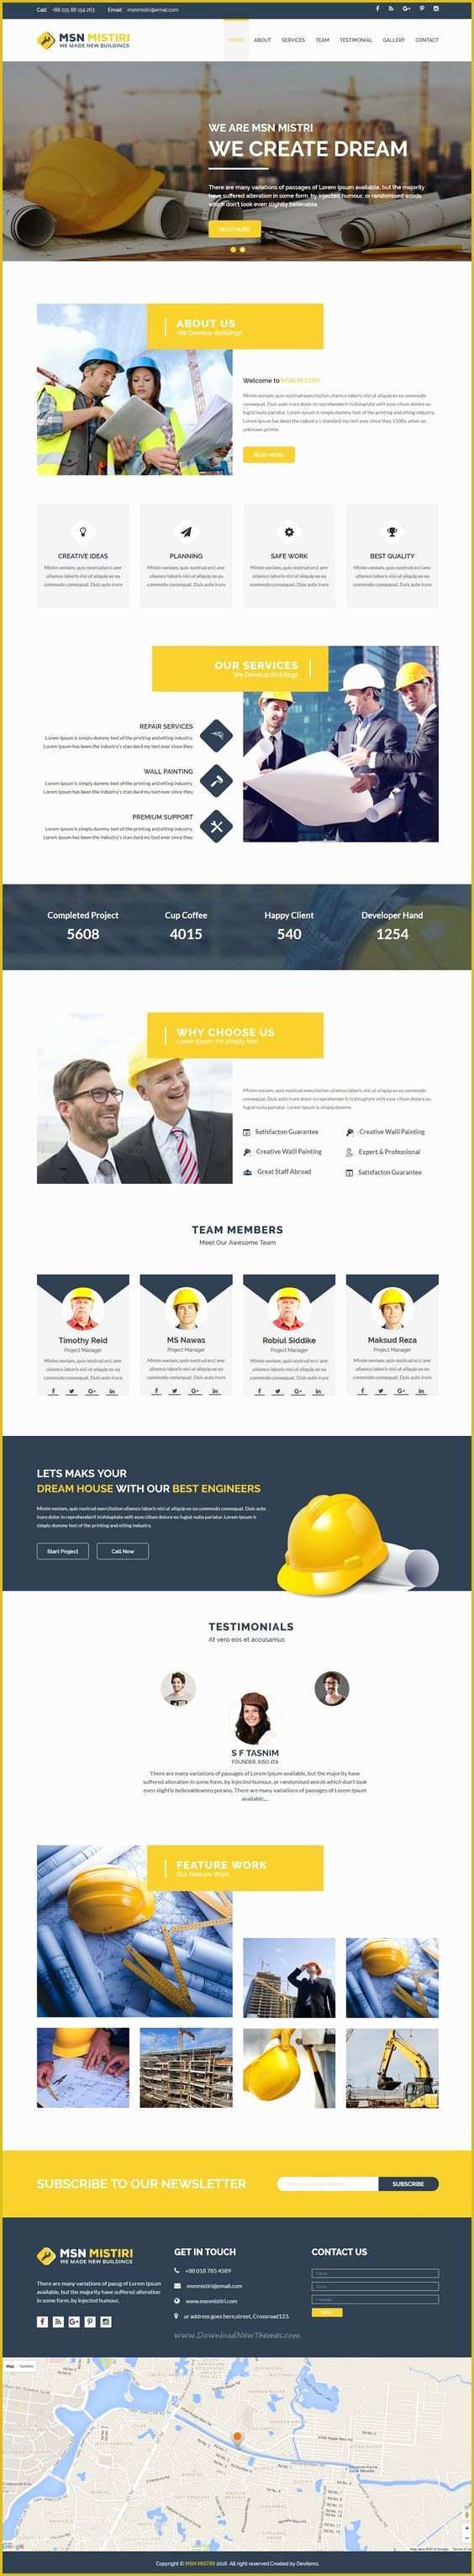 Free Construction Website Templates Bootstrap Of Construction Panies Construction and Templates On